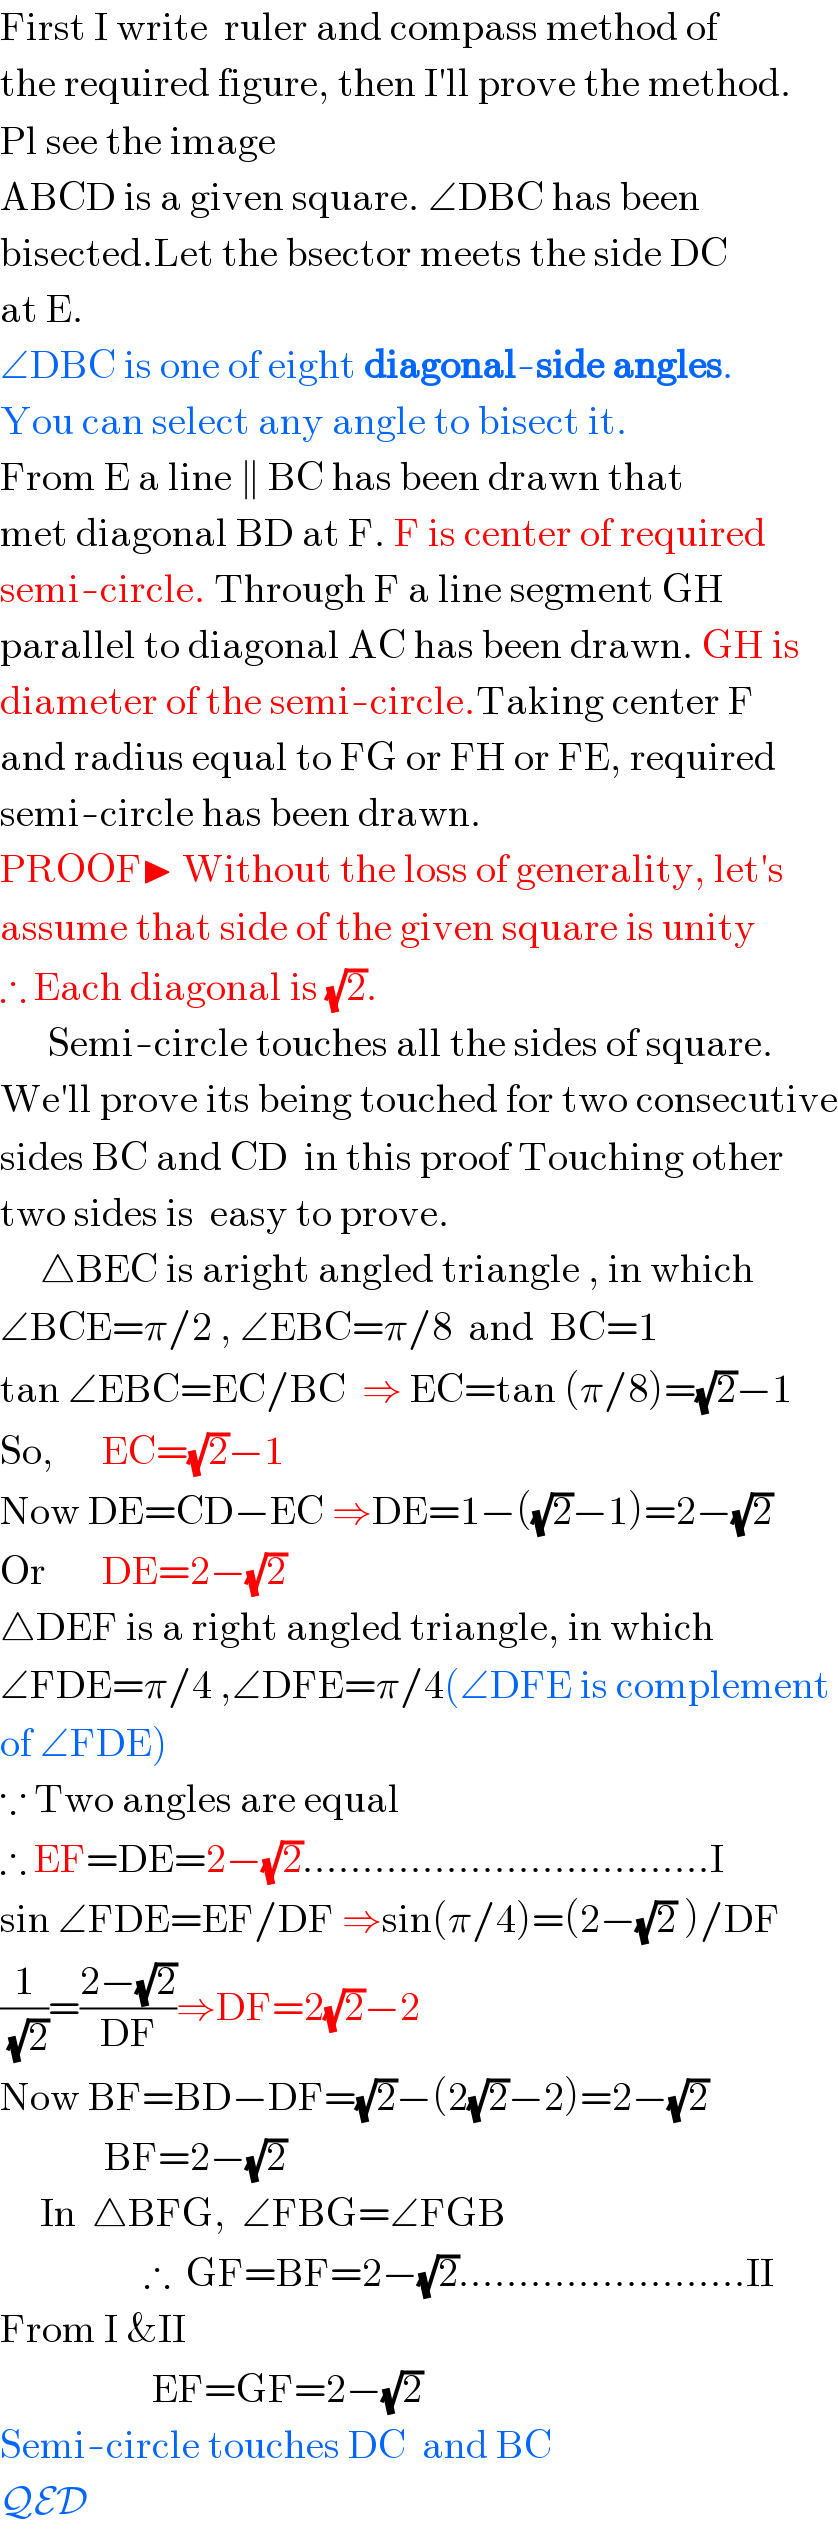 First I write  ruler and compass method of  the required figure, then I′ll prove the method.  Pl see the image  ABCD is a given square. ∠DBC has been  bisected.Let the bsector meets the side DC  at E.  ∠DBC is one of eight diagonal-side angles.  You can select any angle to bisect it.  From E a line ∥ BC has been drawn that  met diagonal BD at F. F is center of required  semi-circle. Through F a line segment GH   parallel to diagonal AC has been drawn. GH is  diameter of the semi-circle.Taking center F  and radius equal to FG or FH or FE, required  semi-circle has been drawn.  PROOF▶ Without the loss of generality, let′s  assume that side of the given square is unity  ∴ Each diagonal is (√2).        Semi-circle touches all the sides of square.  We′ll prove its being touched for two consecutive  sides BC and CD  in this proof Touching other  two sides is  easy to prove.       △BEC is aright angled triangle , in which  ∠BCE=π/2 , ∠EBC=π/8  and  BC=1  tan ∠EBC=EC/BC  ⇒ EC=tan (π/8)=(√2)−1  So,      EC=(√2)−1  Now DE=CD−EC ⇒DE=1−((√2)−1)=2−(√2)  Or       DE=2−(√2)  △DEF is a right angled triangle, in which  ∠FDE=π/4 ,∠DFE=π/4(∠DFE is complement  of ∠FDE)  ∵ Two angles are equal  ∴ EF=DE=2−(√2)..................................I  sin ∠FDE=EF/DF ⇒sin(π/4)=(2−(√2) )/DF  (1/(√2))=((2−(√2))/(DF))⇒DF=2(√2)−2  Now BF=BD−DF=(√2)−(2(√2)−2)=2−(√2)               BF=2−(√2)       In  △BFG,  ∠FBG=∠FGB                    ∴  GF=BF=2−(√2)........................II  From I &II                     EF=GF=2−(√2)  Semi-circle touches DC  and BC  QED  